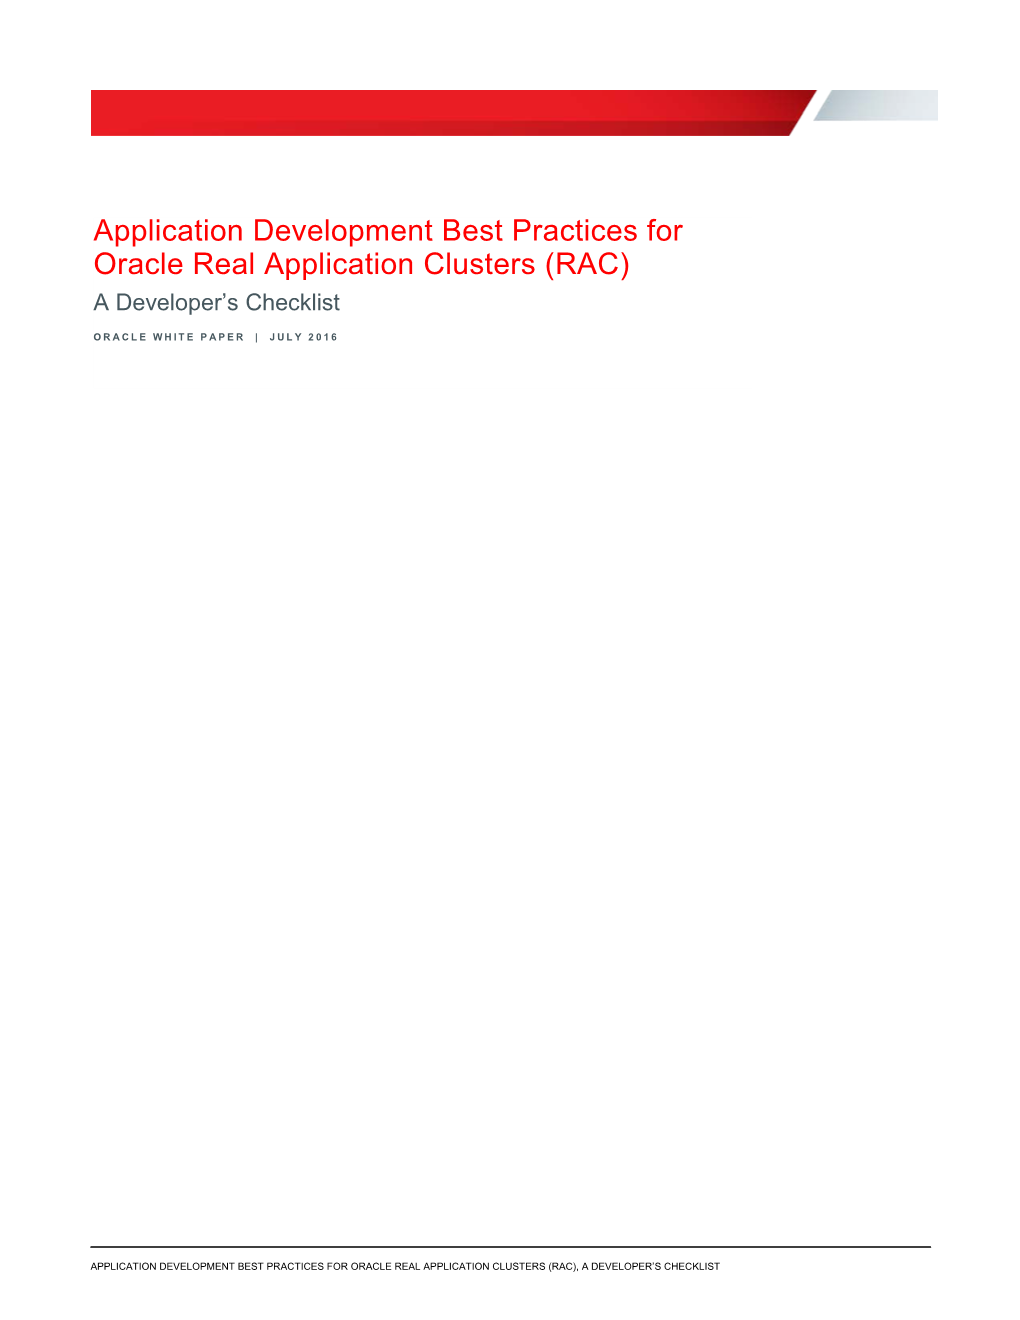 Application Development Best Practices for Oracle Real Application Clusters (RAC) a Developer’S Checklist